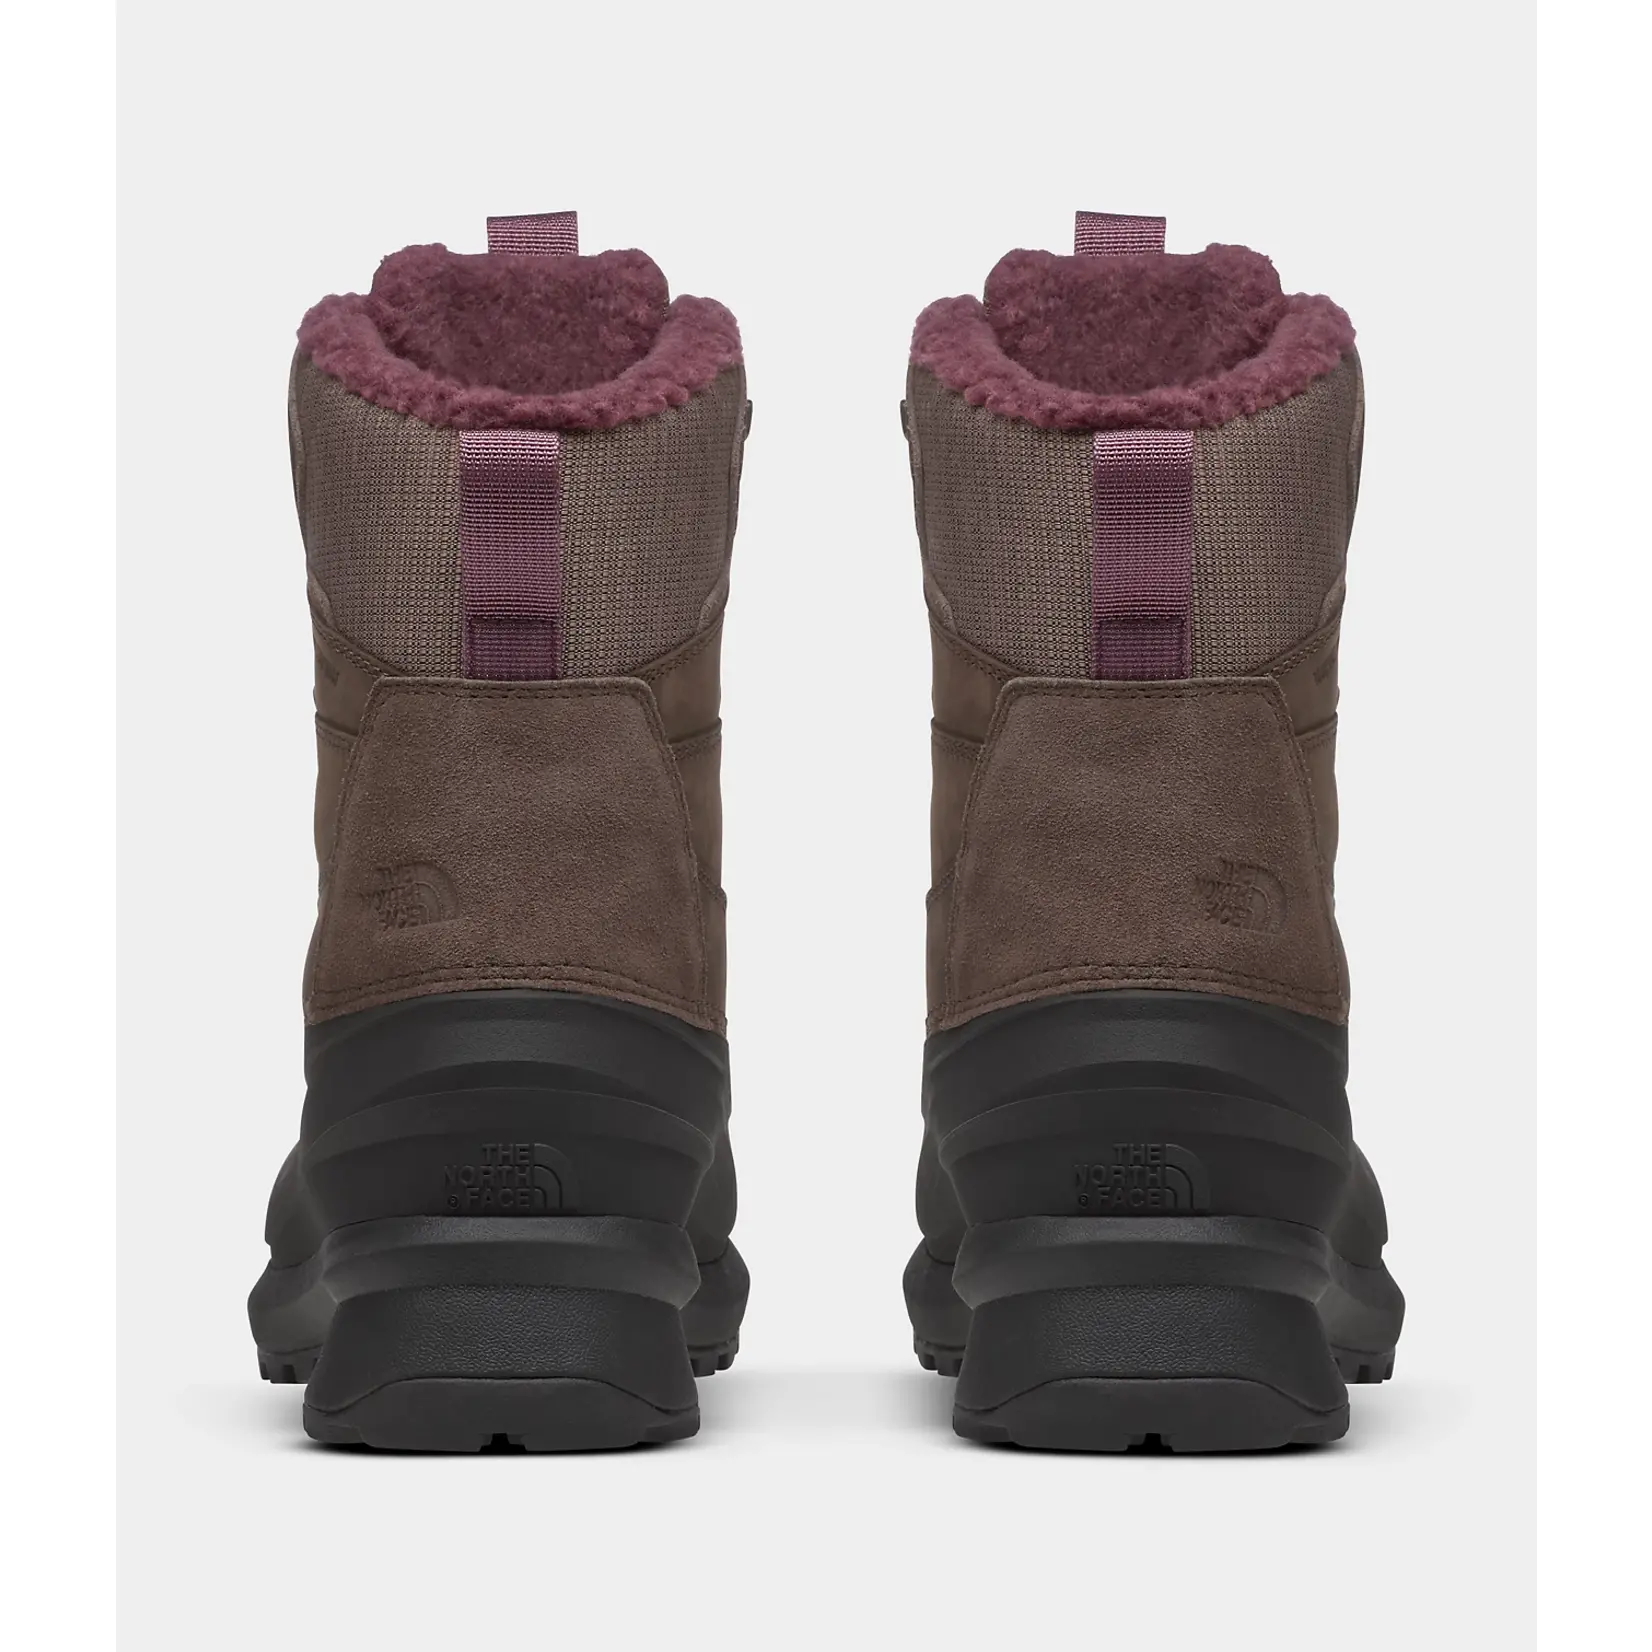 The North Face The North Face Women’s Chilkat V 400 Boots